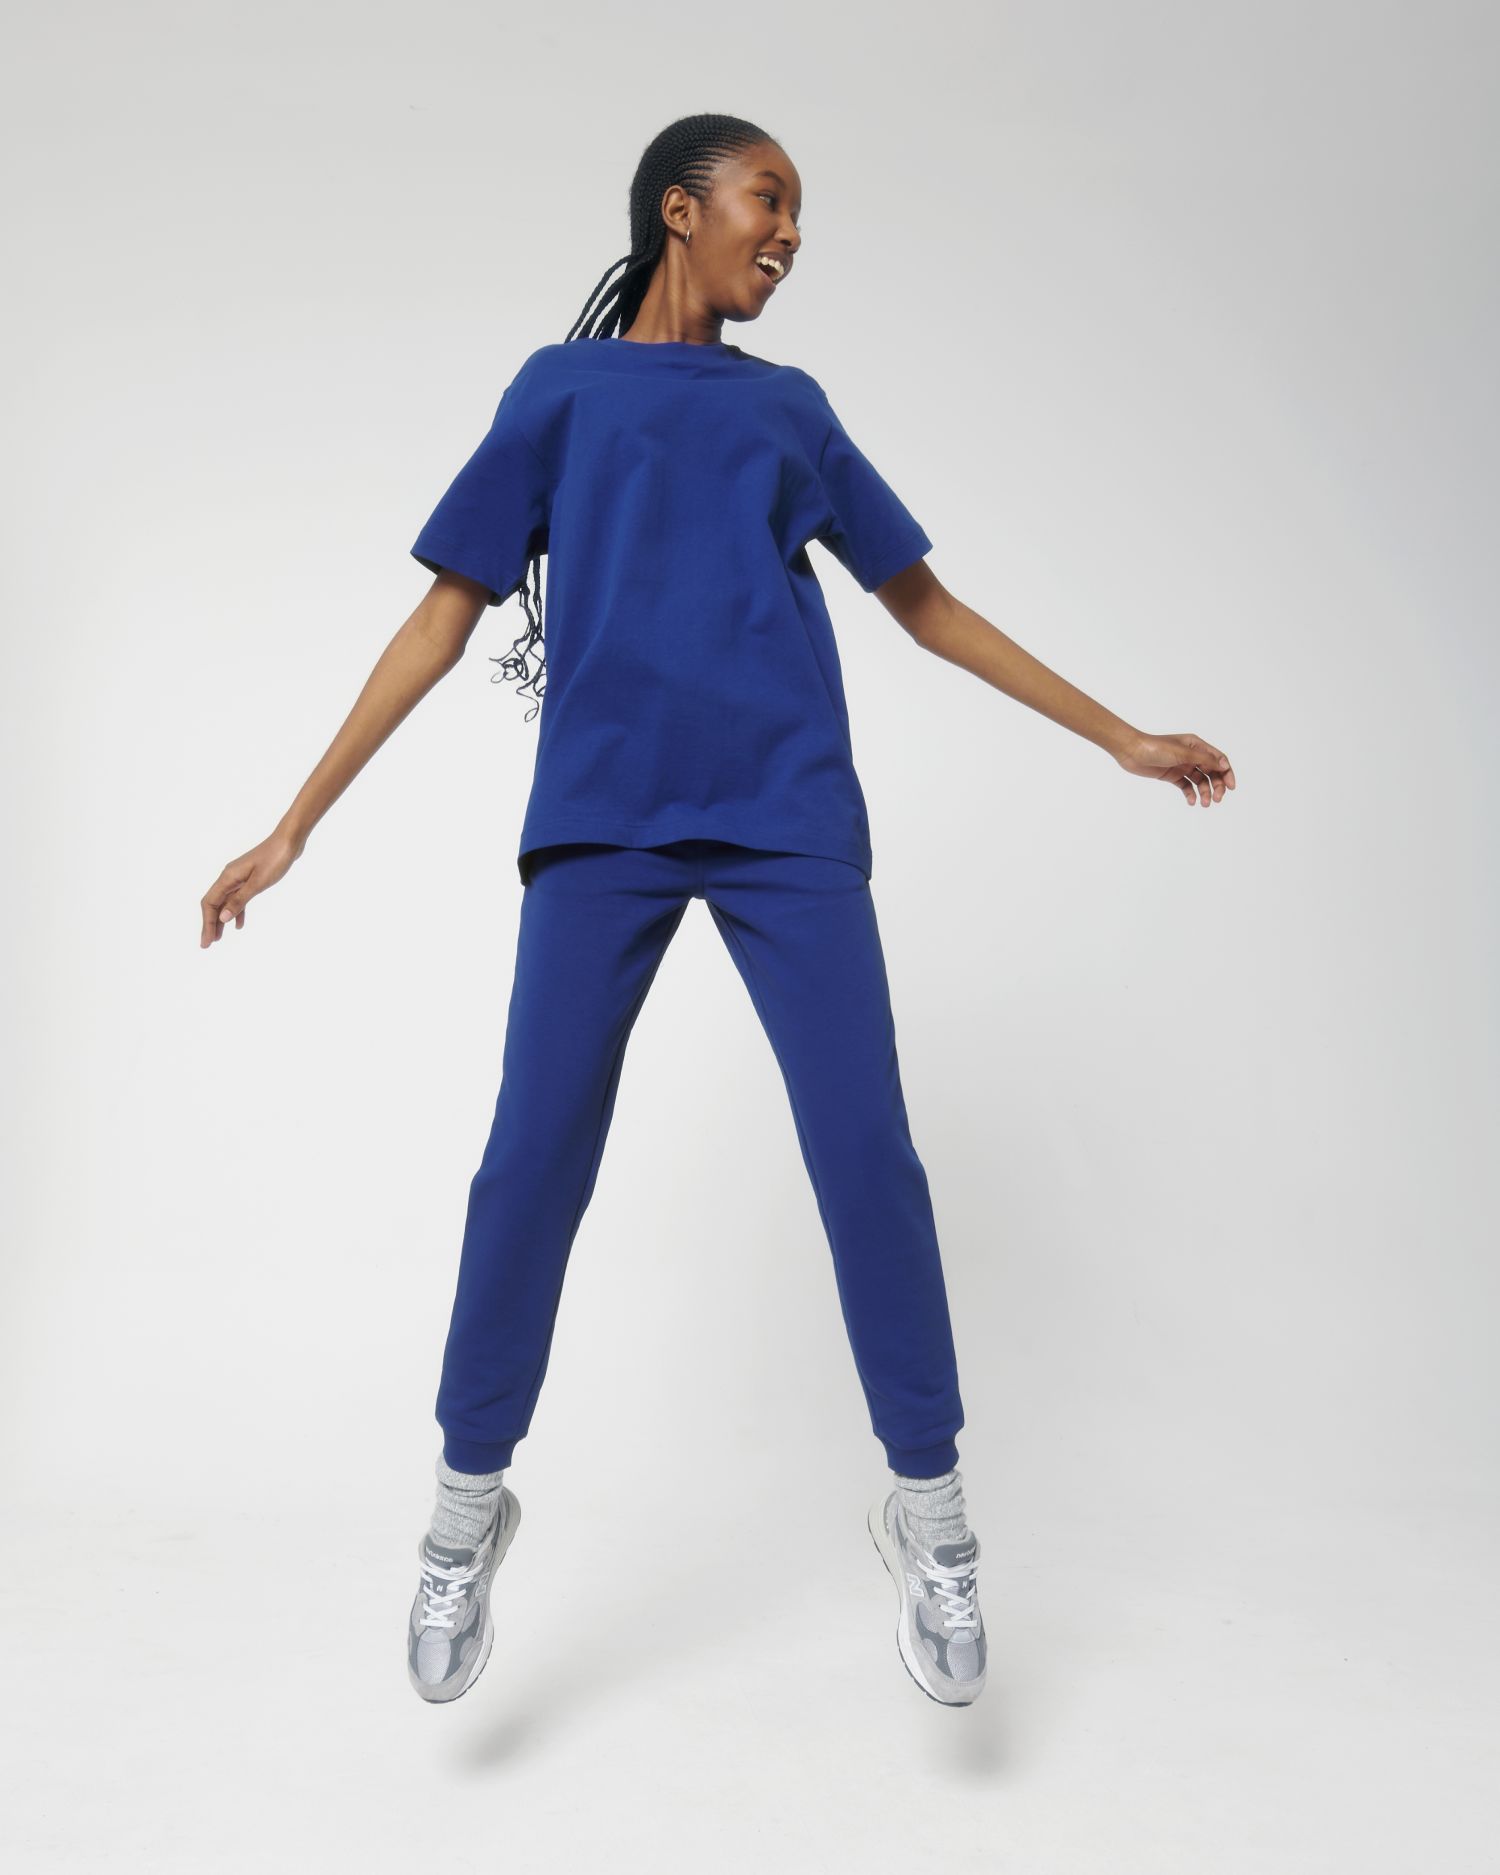 T-Shirt Freestyler in Farbe Worker Blue